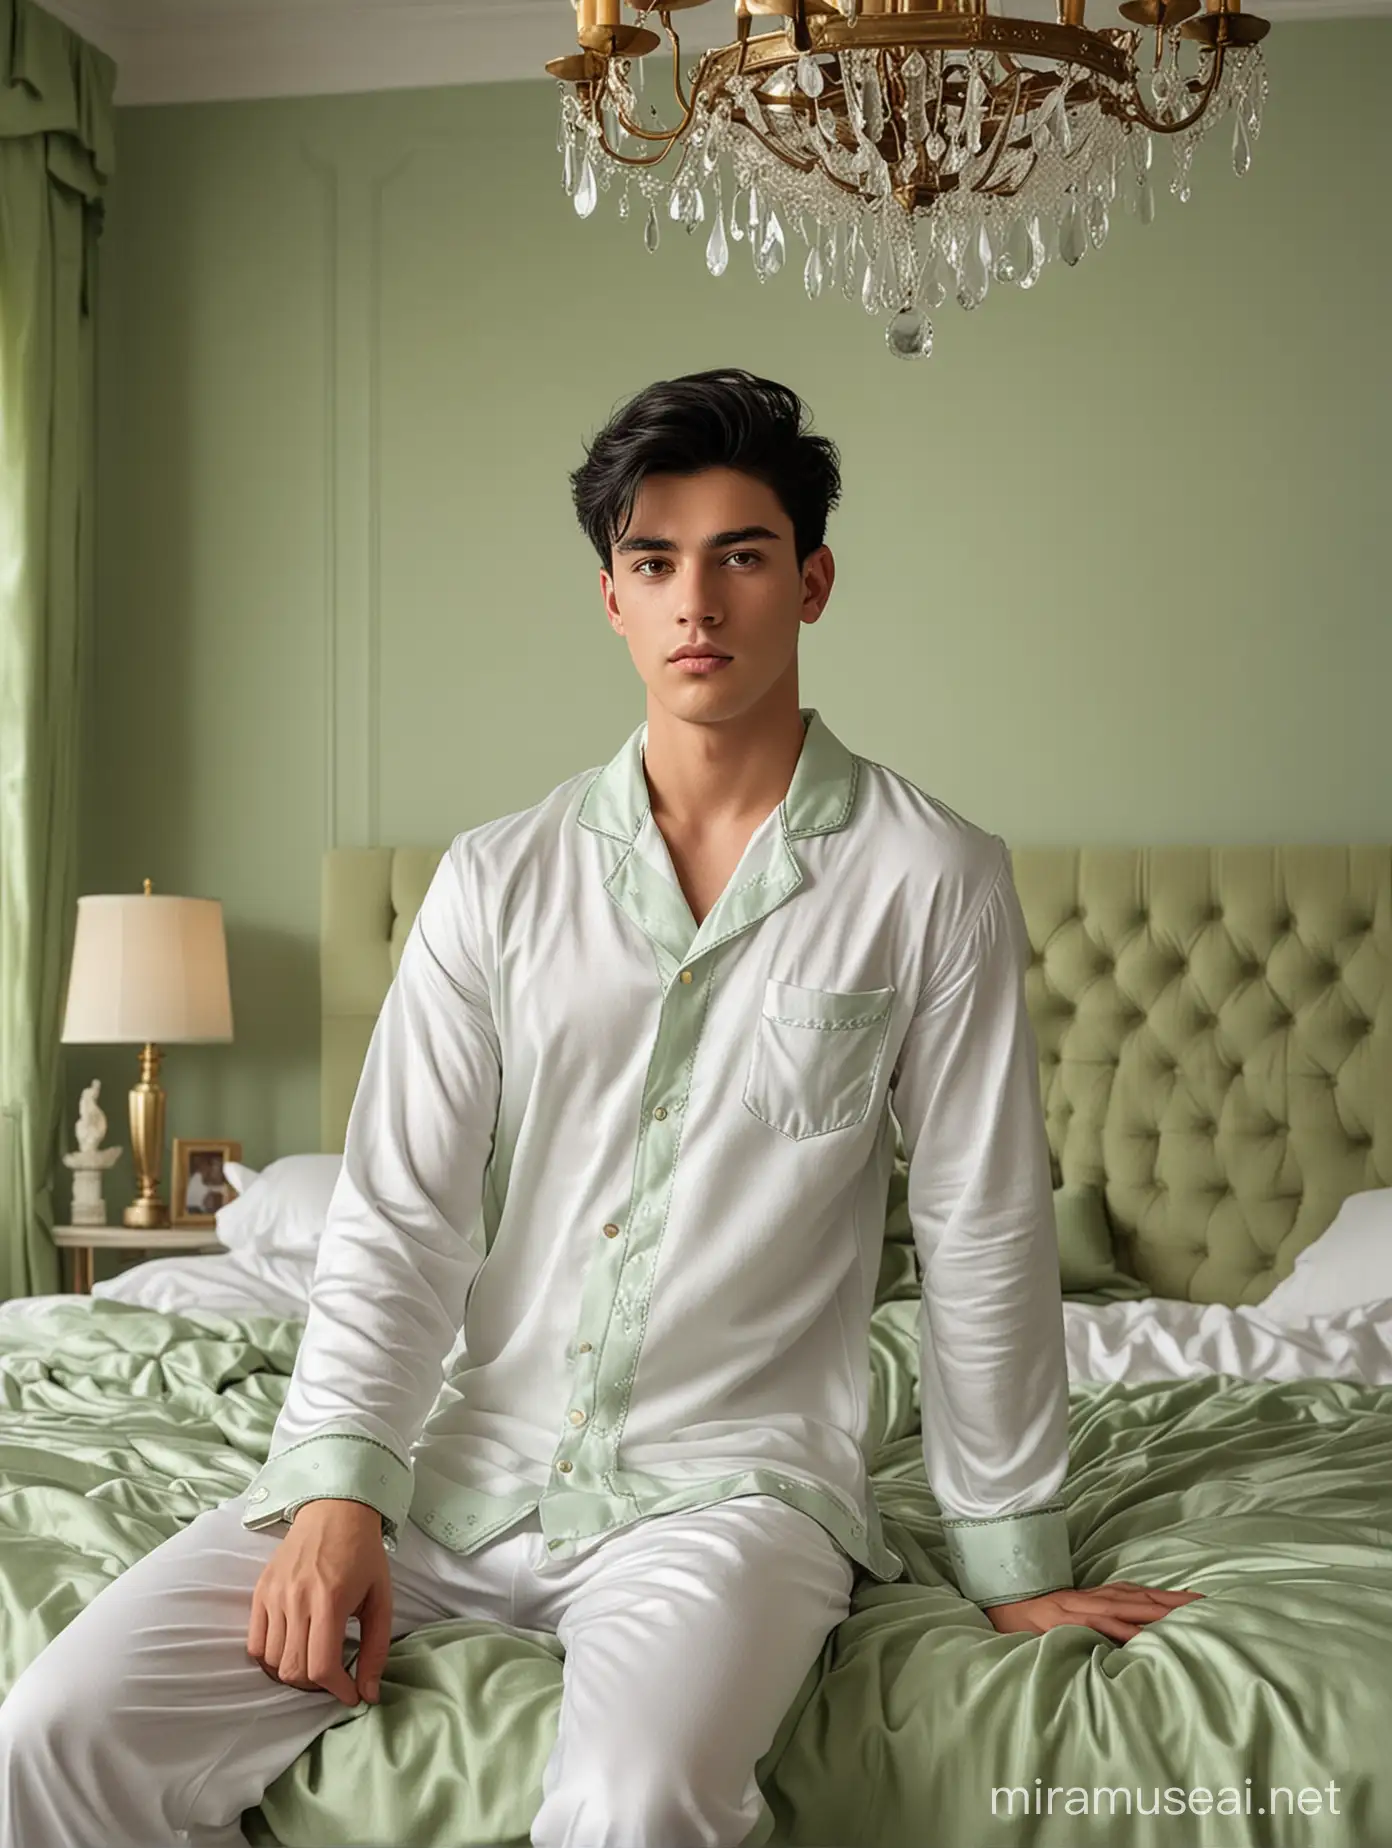 Luxurious SageColored Room Handsome Teenager Resting in WhiteGreen Pajamas